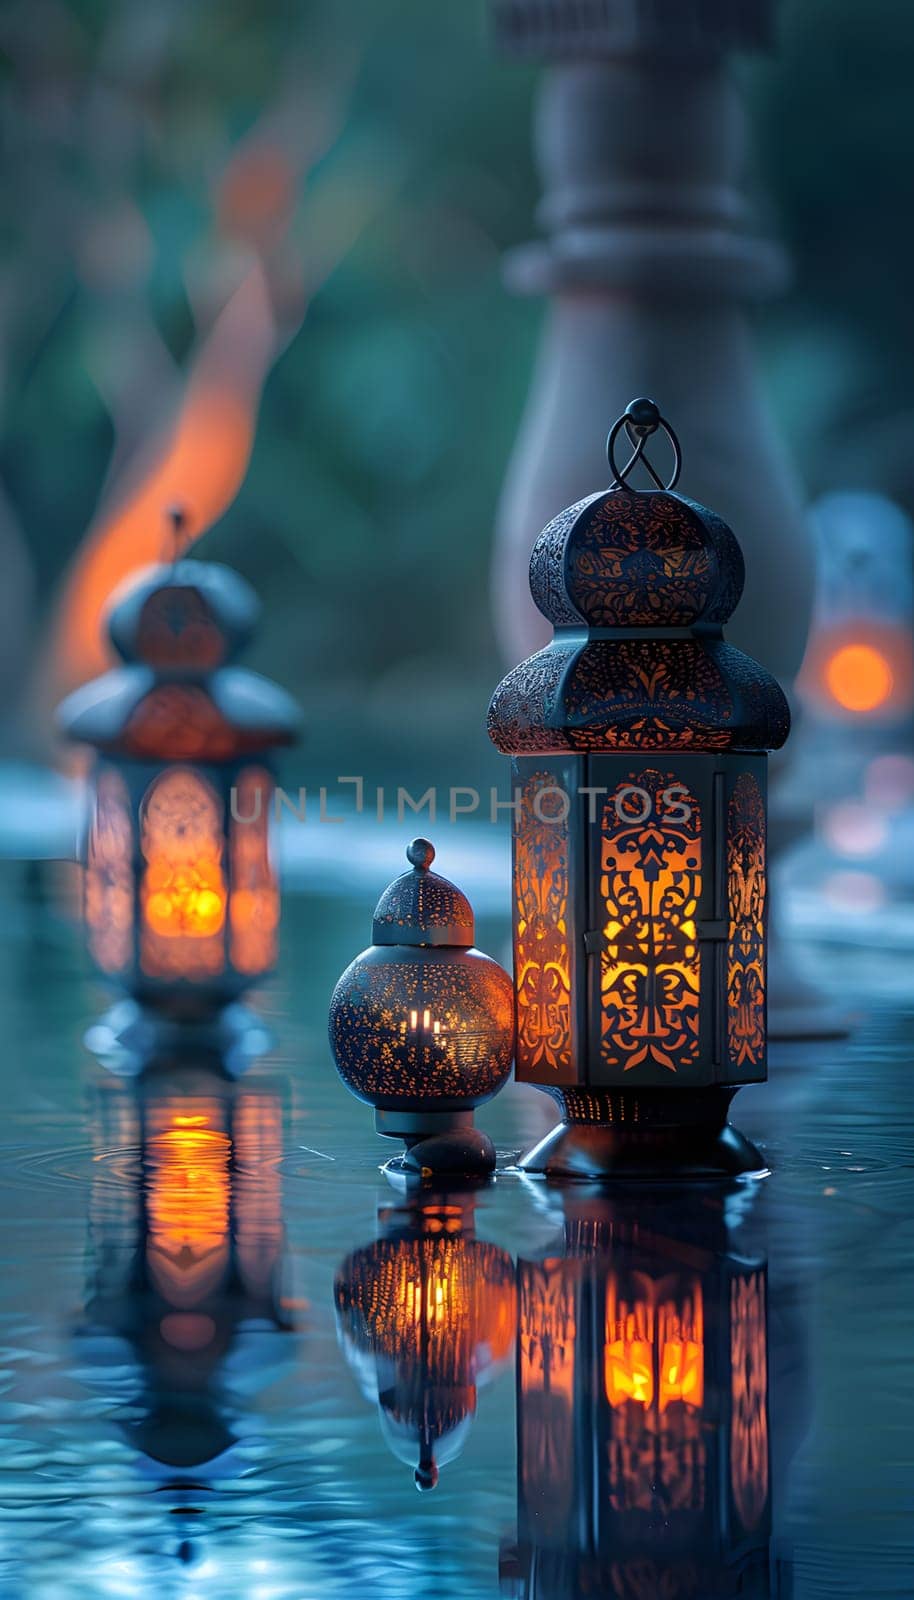 Lanterns glowing in water create a magical atmosphere at midnight in the city by Nadtochiy